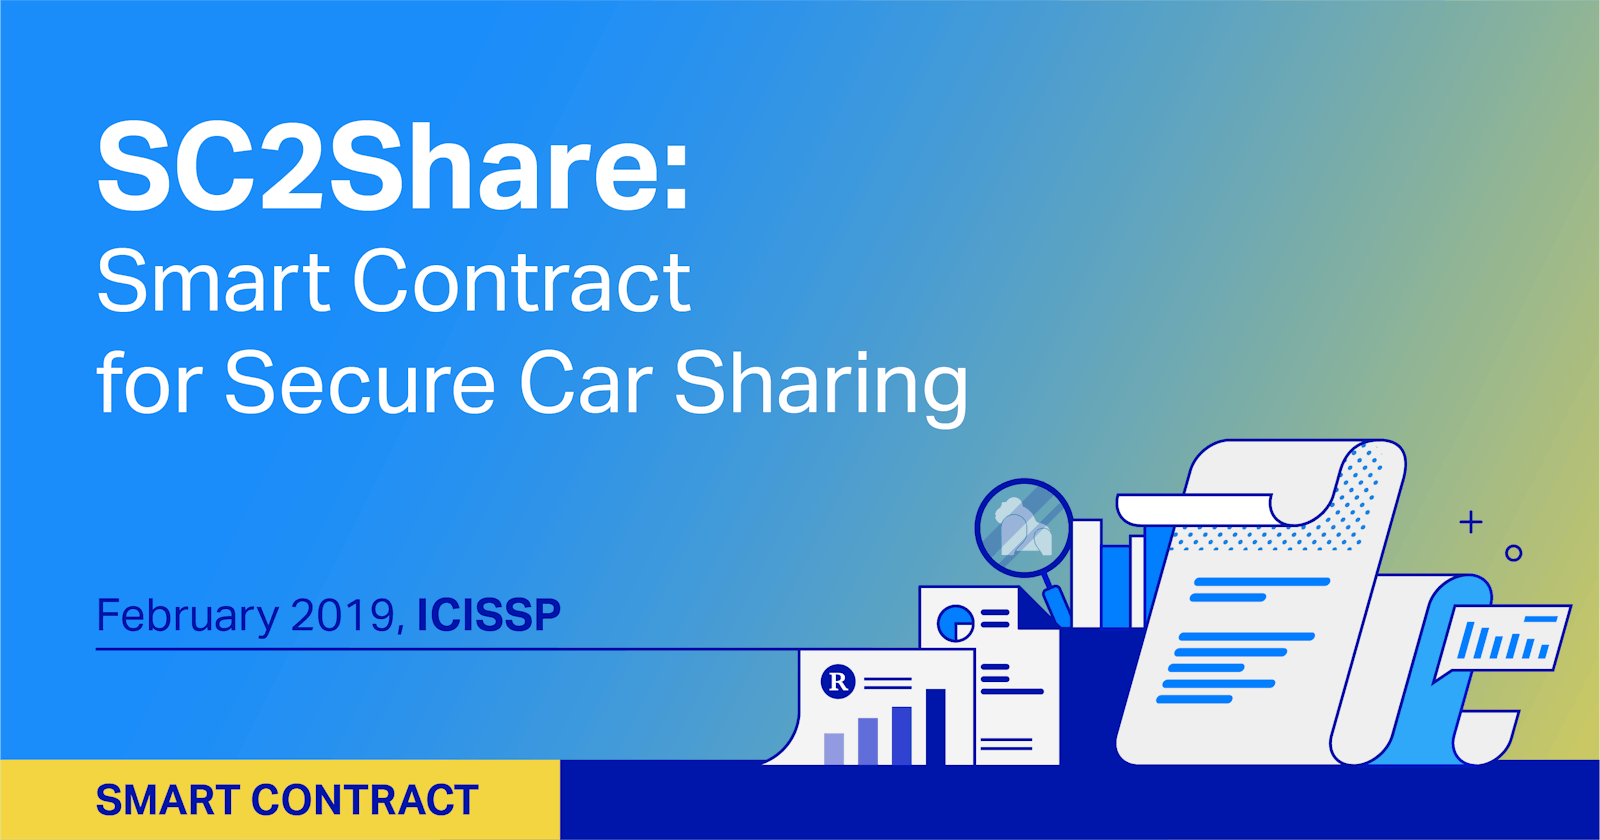 SC2Share: Smart Contract for Secure Car Sharing